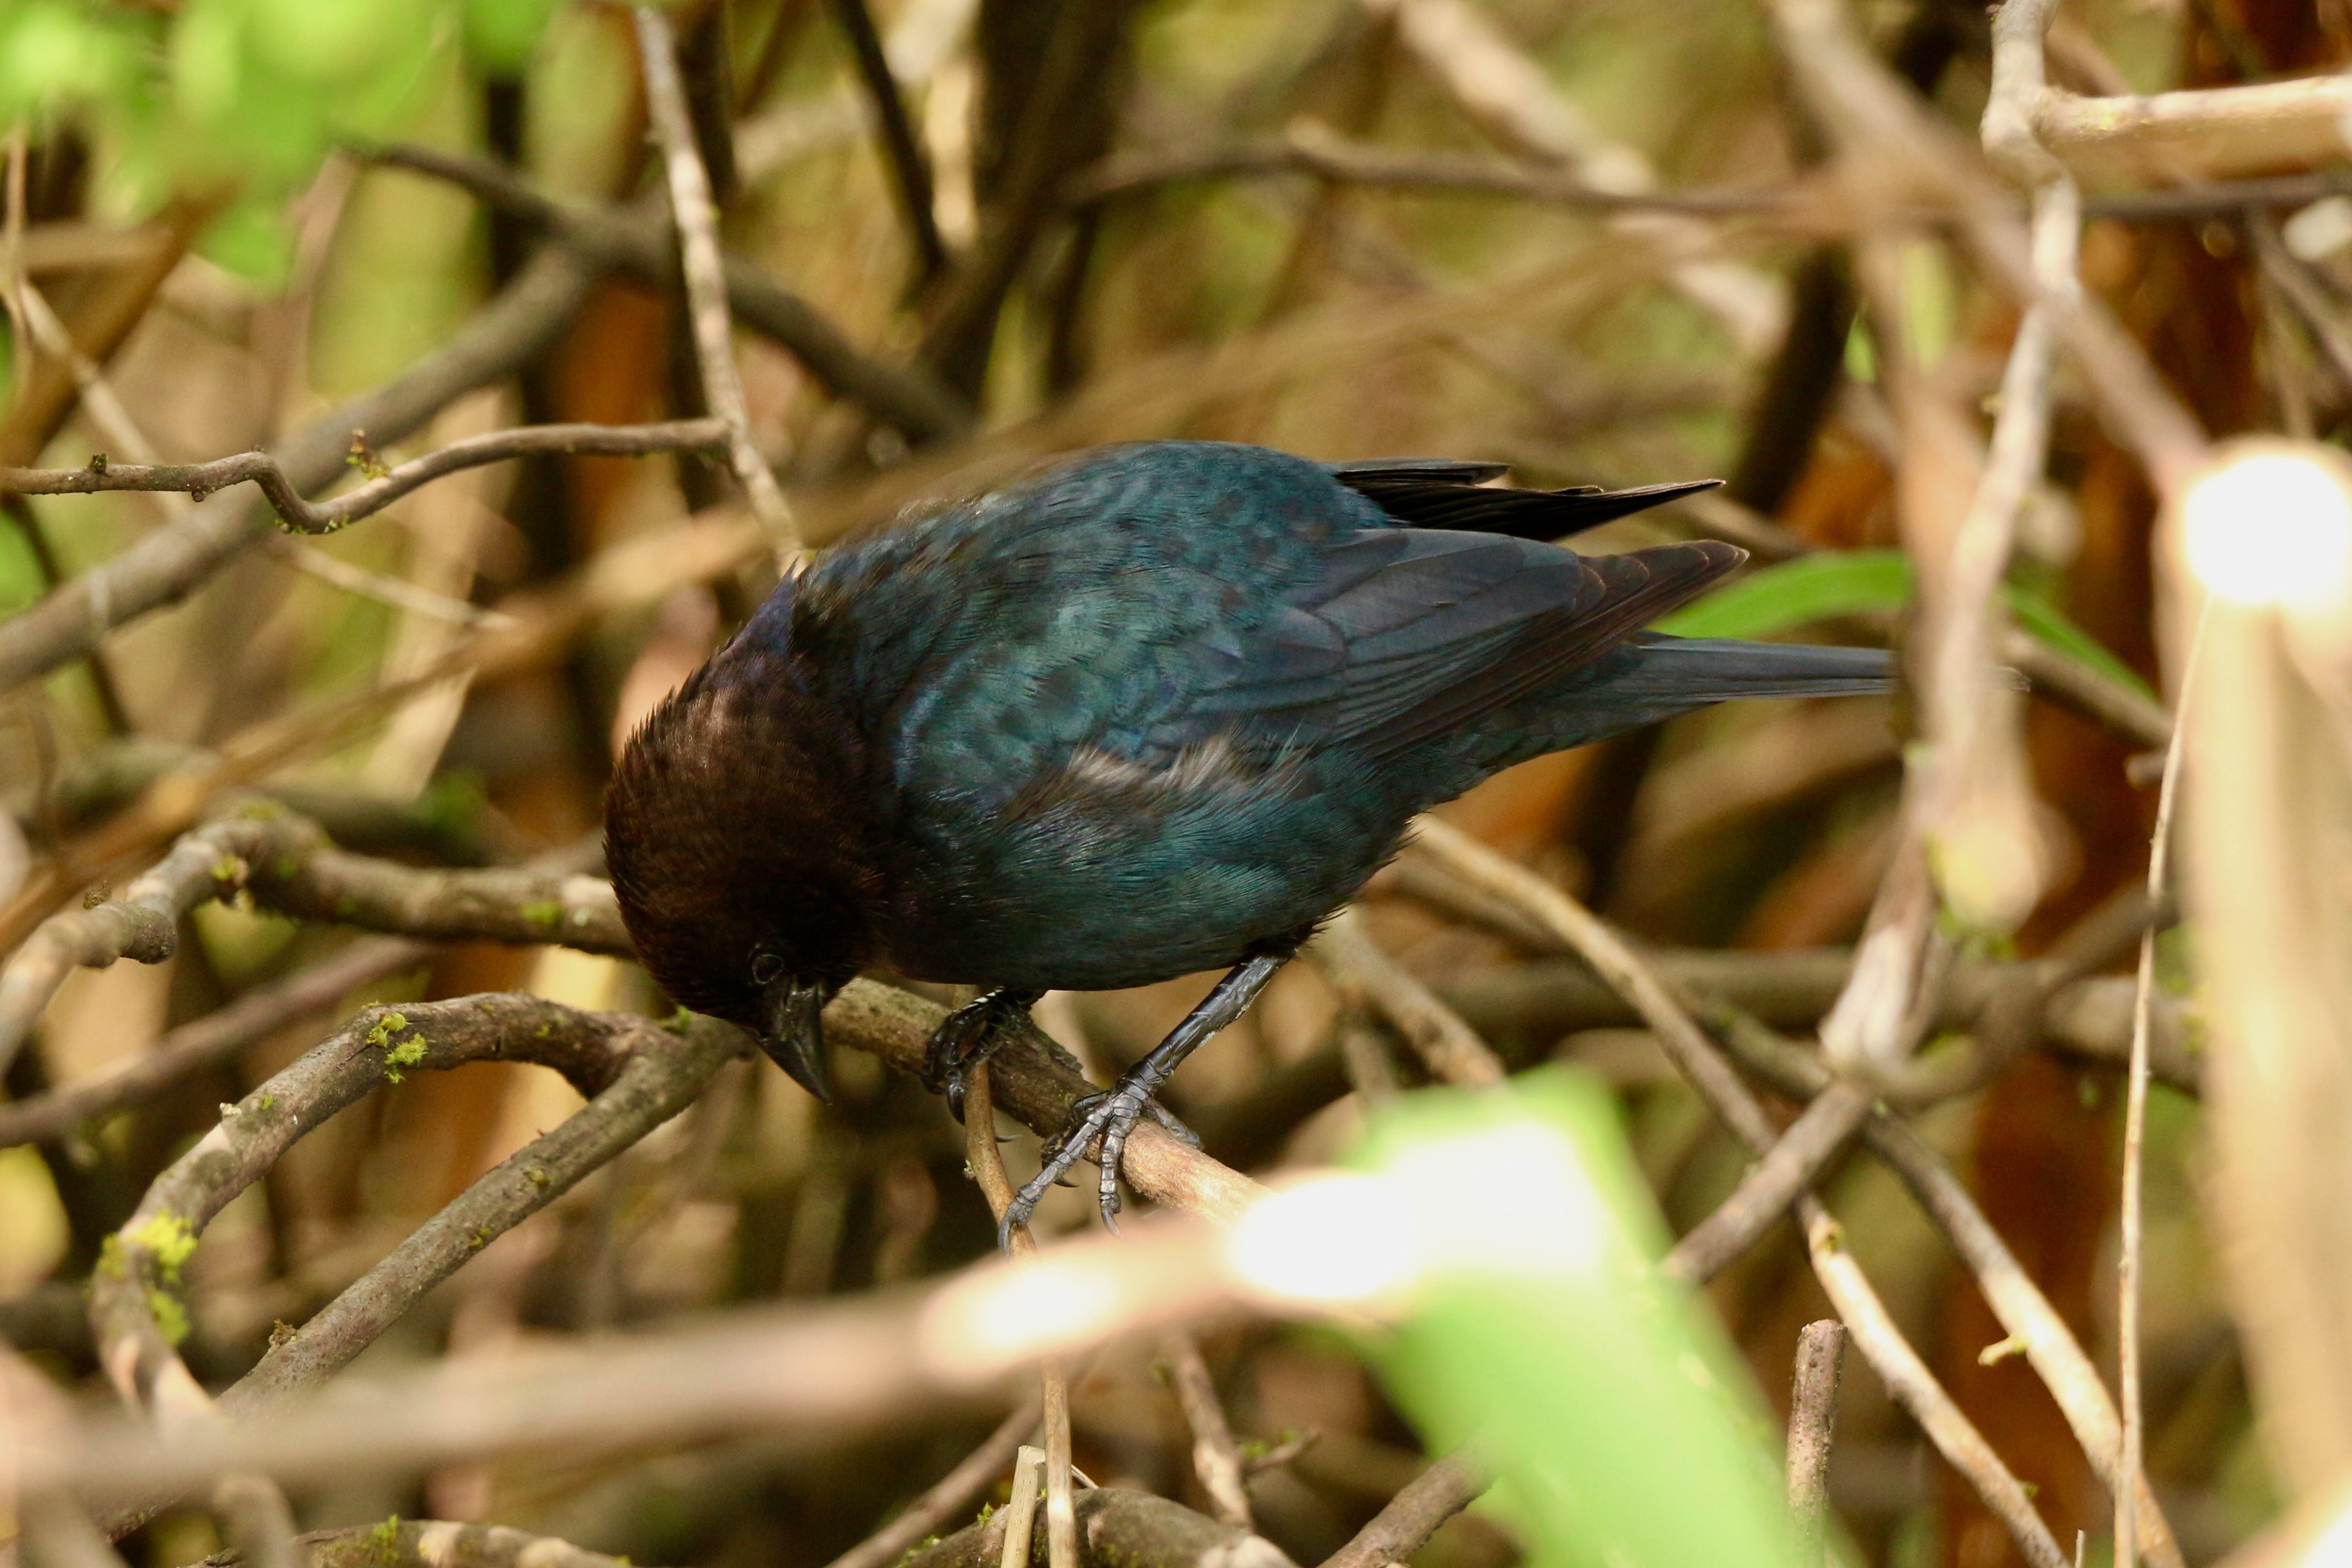 Male brown-headed cowbird perched on a twig peering down at something below it. It is a small bird with a brown head and iridescent blue-green plumage on the rest of its body.